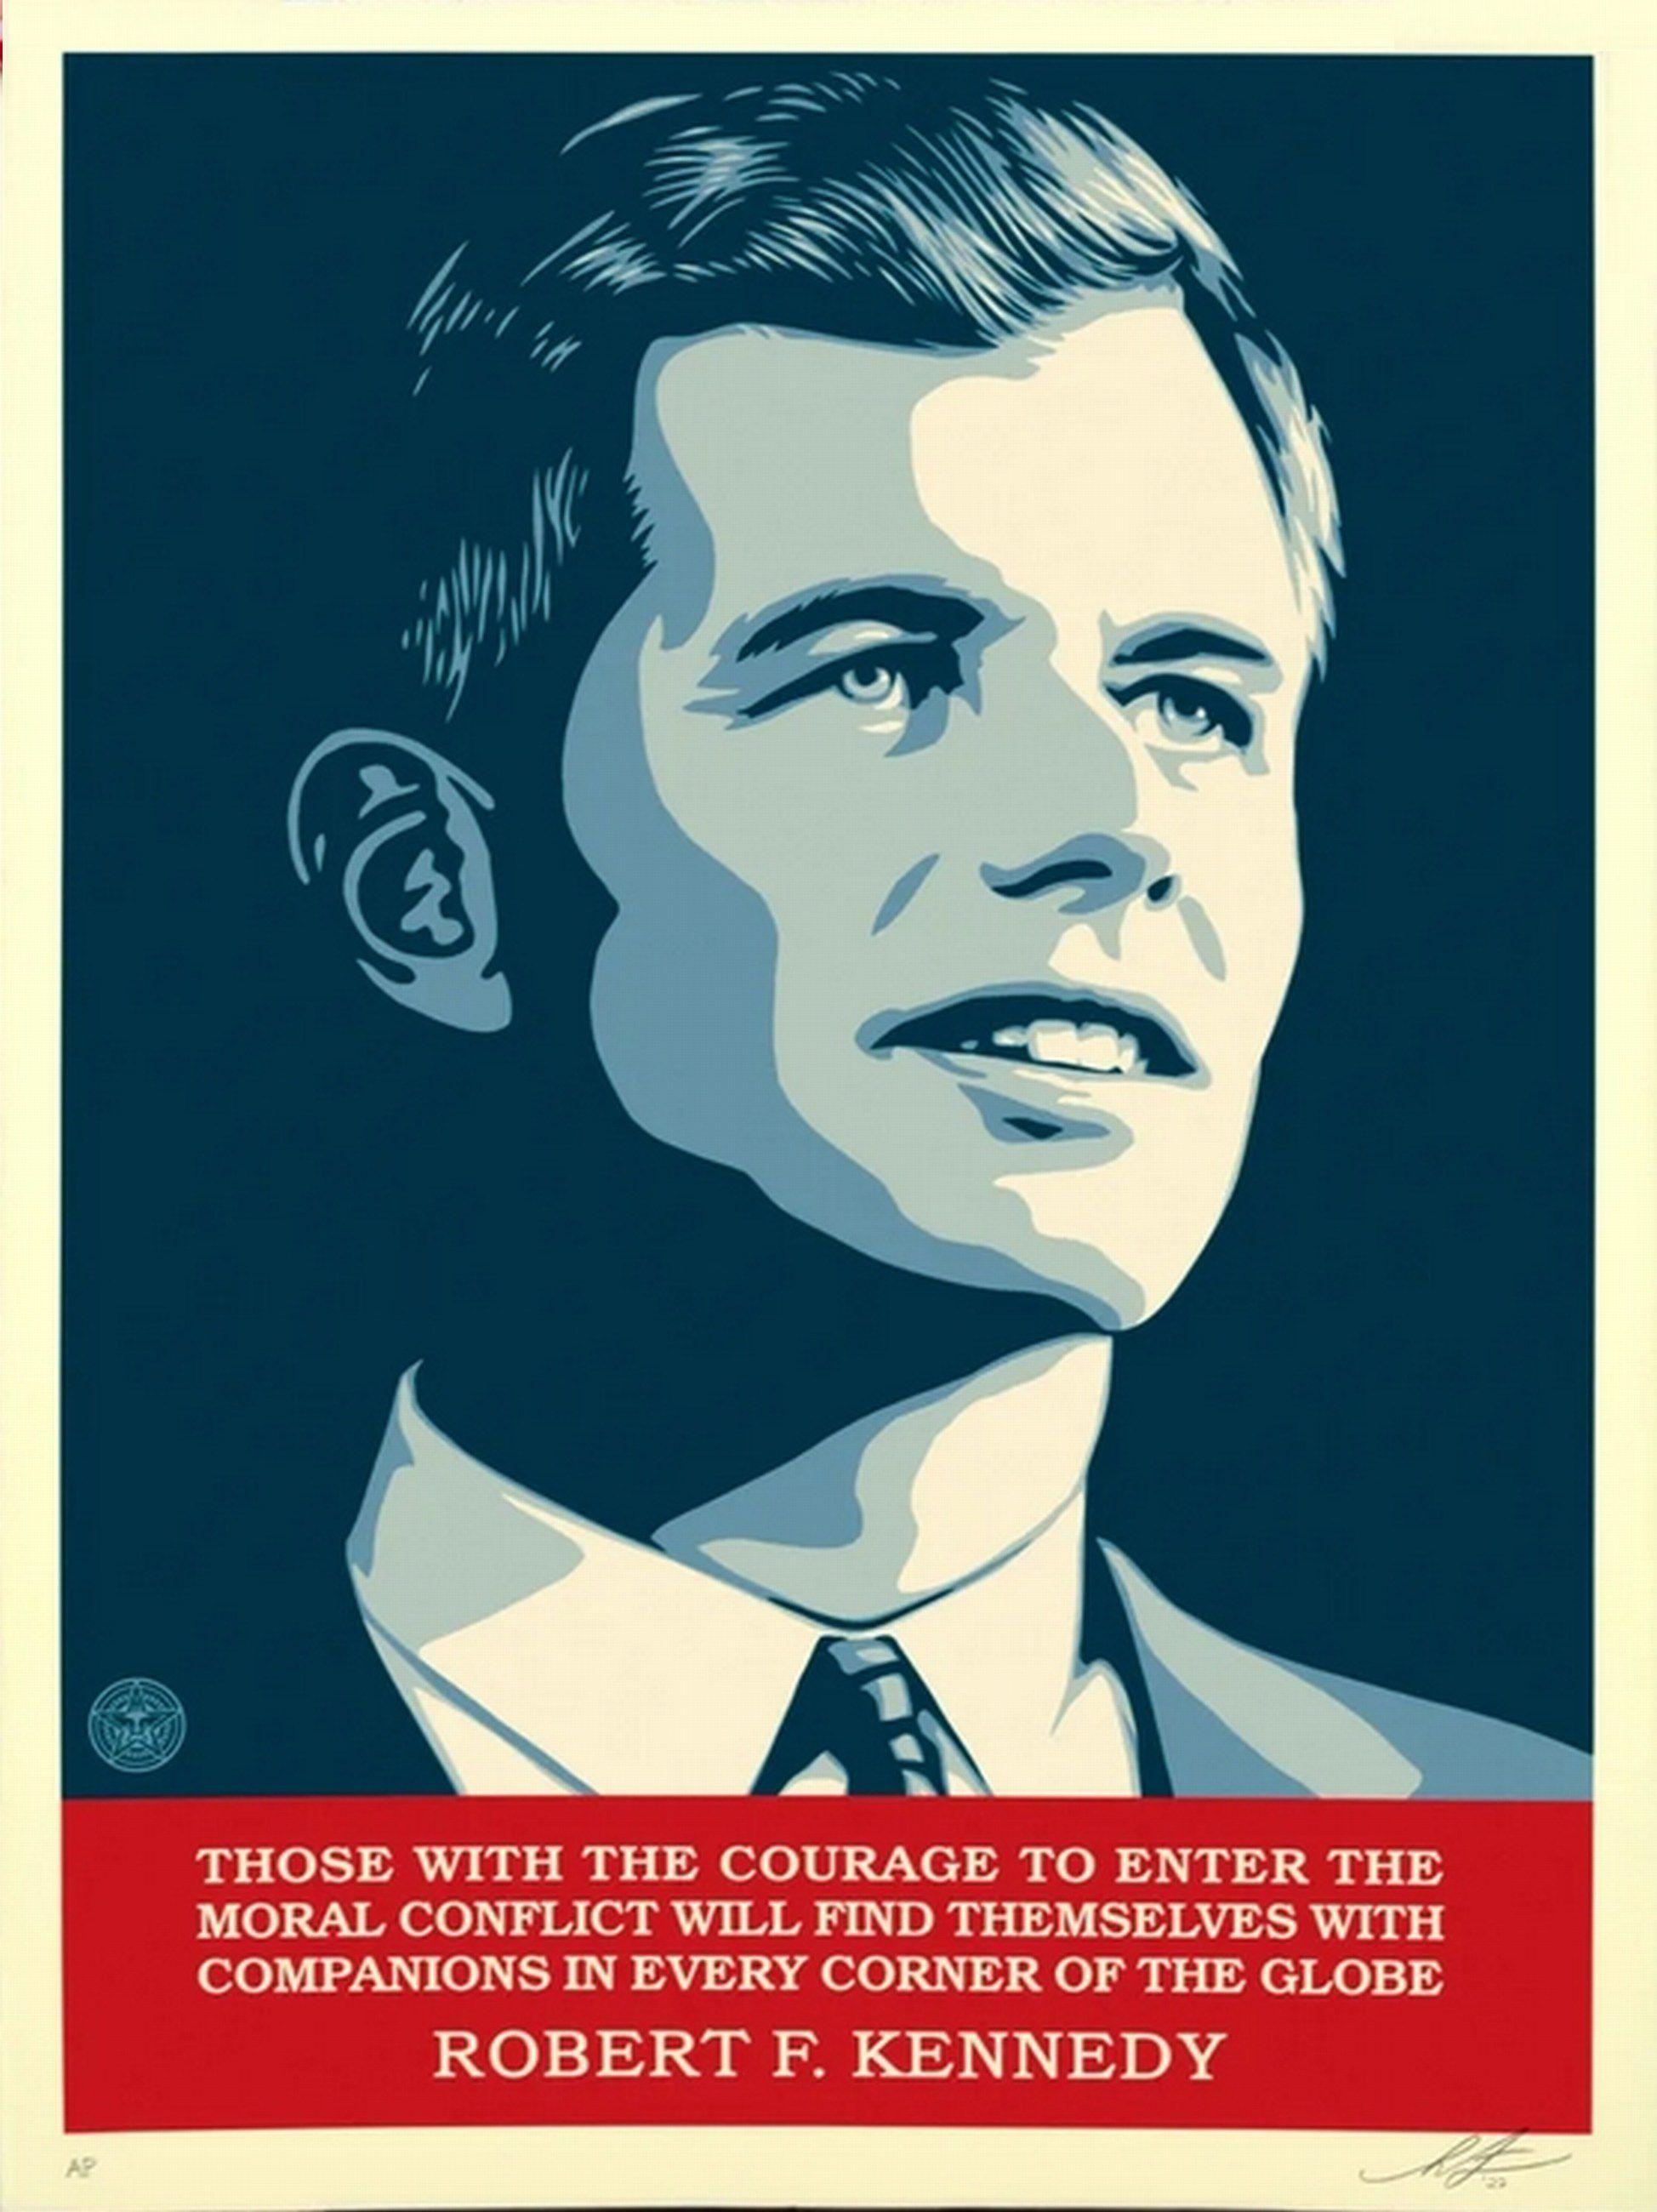 RFK (Iconic, Robert F. Kennedy, Racial Equality, Civil Rights, ~50% OFF) - Print by Shepard Fairey